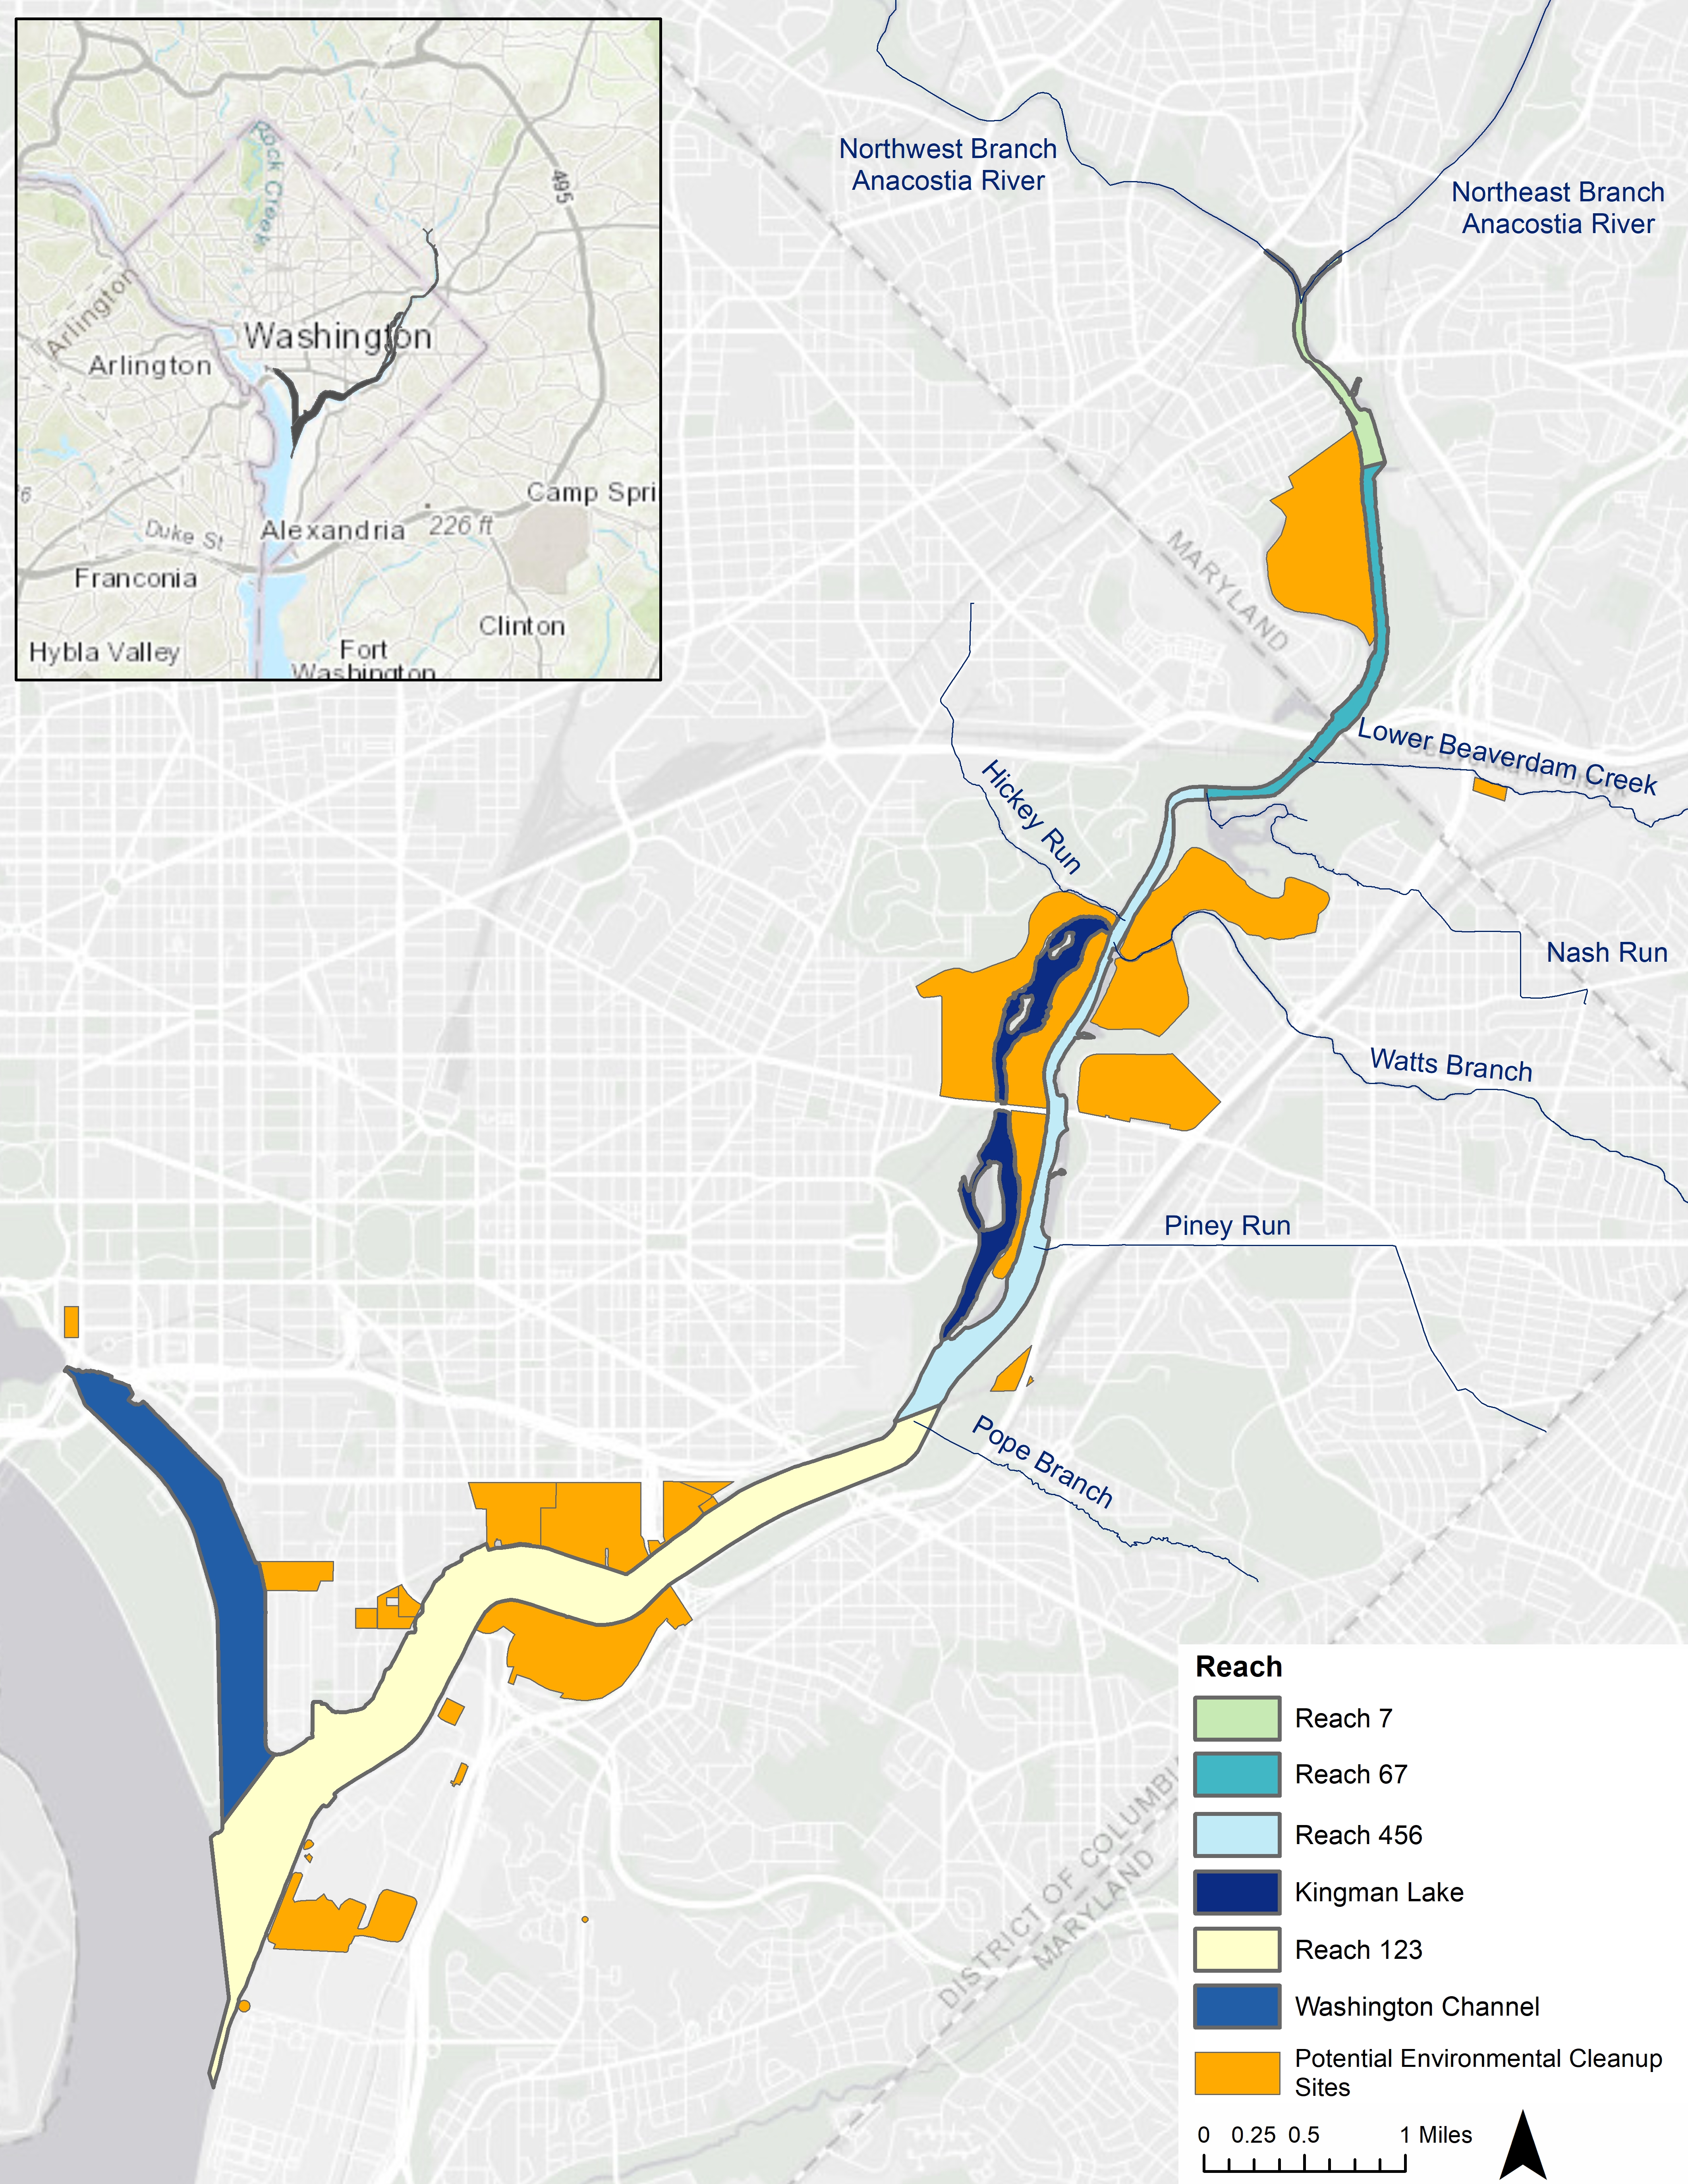 Map of Anacostia River and adjacent lands labeled as Potential Environmental Cleanup Sites between the Potomac River and the Northeast Branch Anacostia River, passing Pope Branch, Piney Run, Hickey Run, Watts Branch, Nash Run, and Lower Beaverdam Creek.